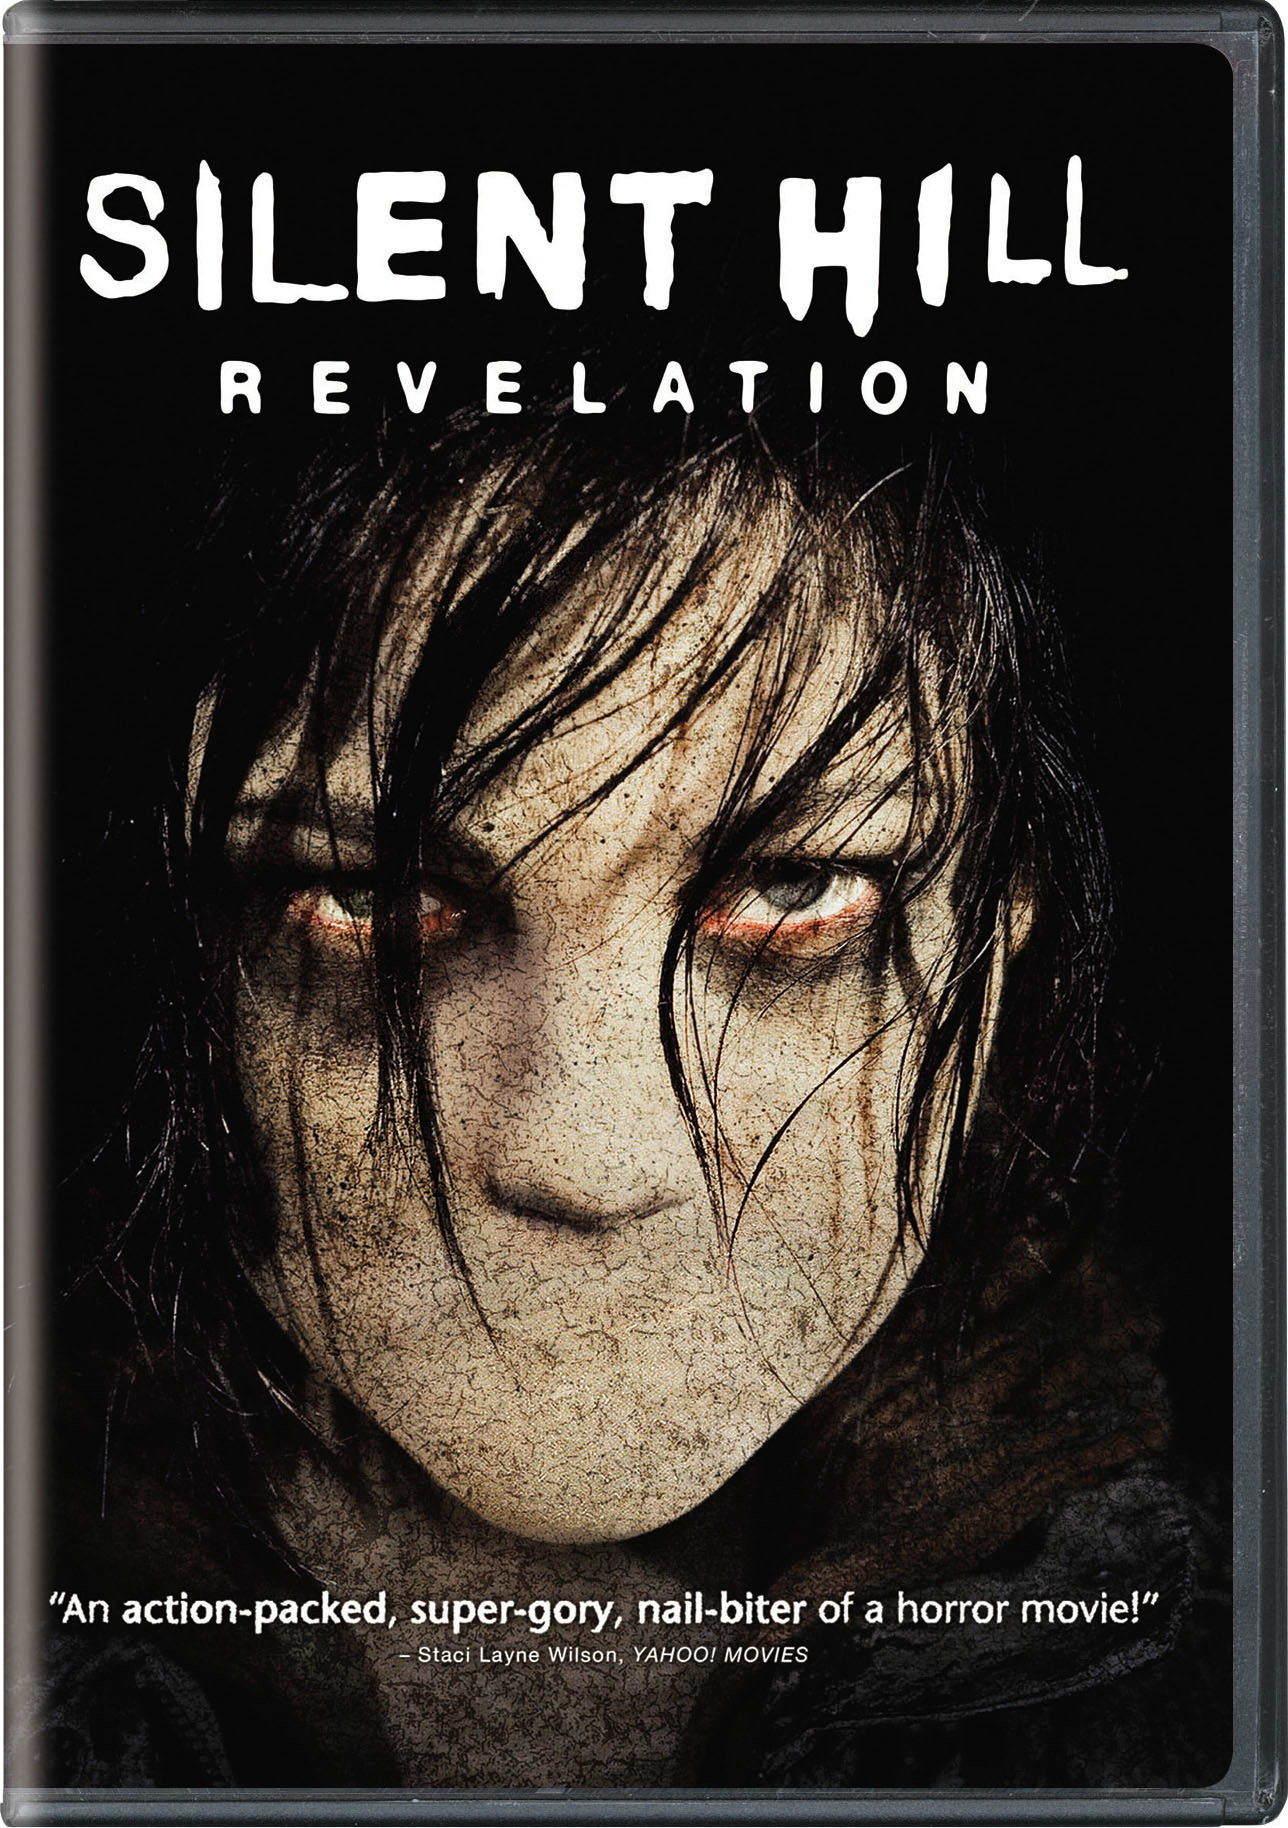 Silent Hill: Revelation - DVD [ 2012 ]  - Horror Movies On DVD - Movies On GRUV